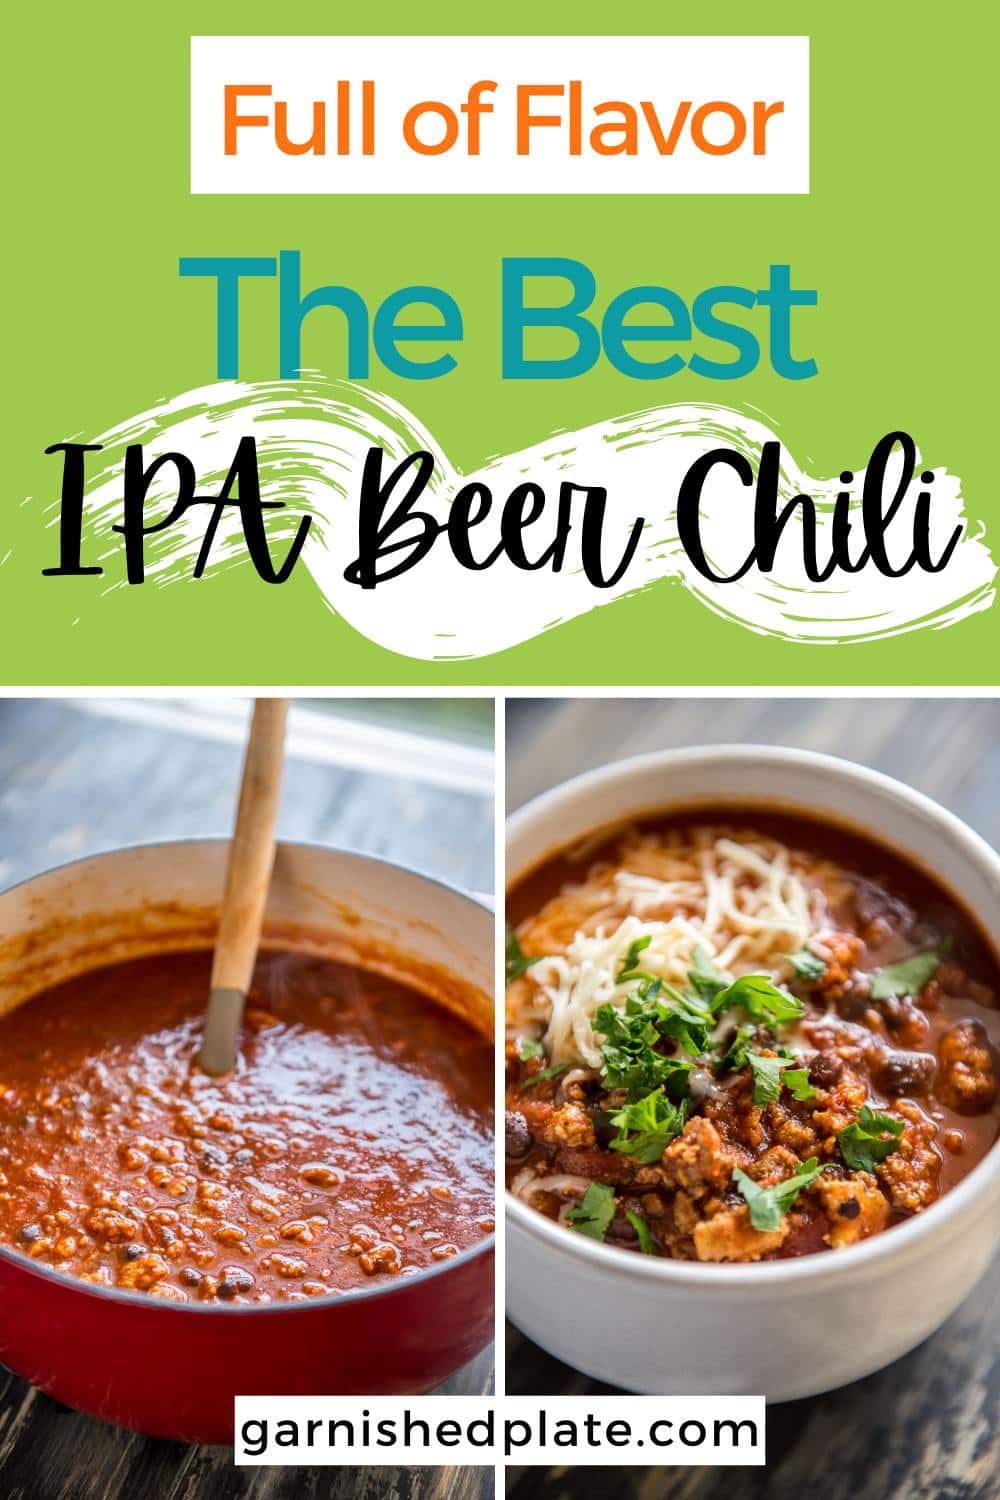 The Best IPA Beer Chili - Garnished Plate